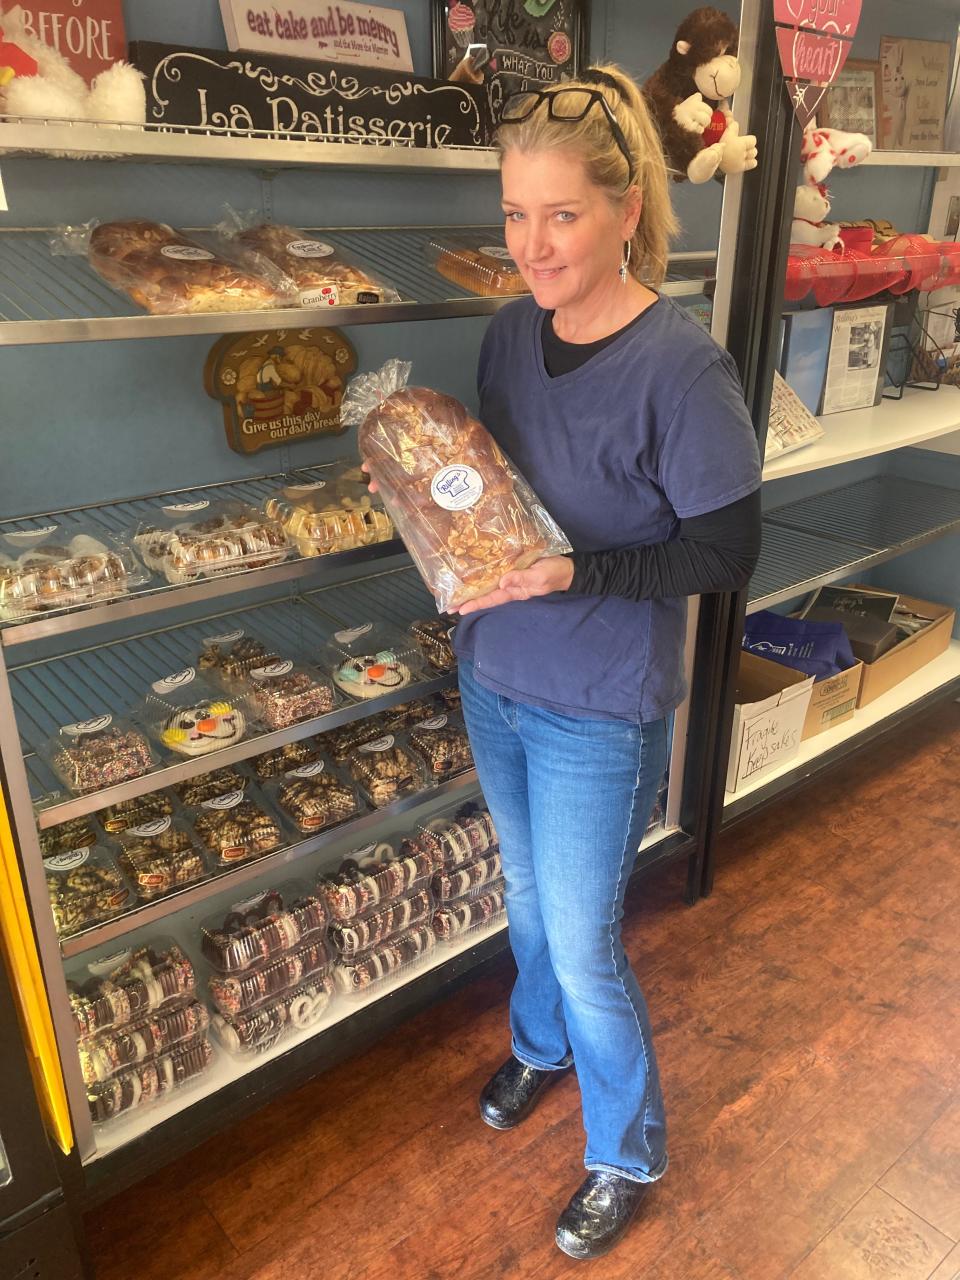 “In January I took a cruise and had a lot of time to think. I don’t have to do this. My children are disinterested. So, time to move on,” said Diane Volz, 54, (above) who with her brother, Michael, are the third generation of Rilling's to run the family bakery shop.